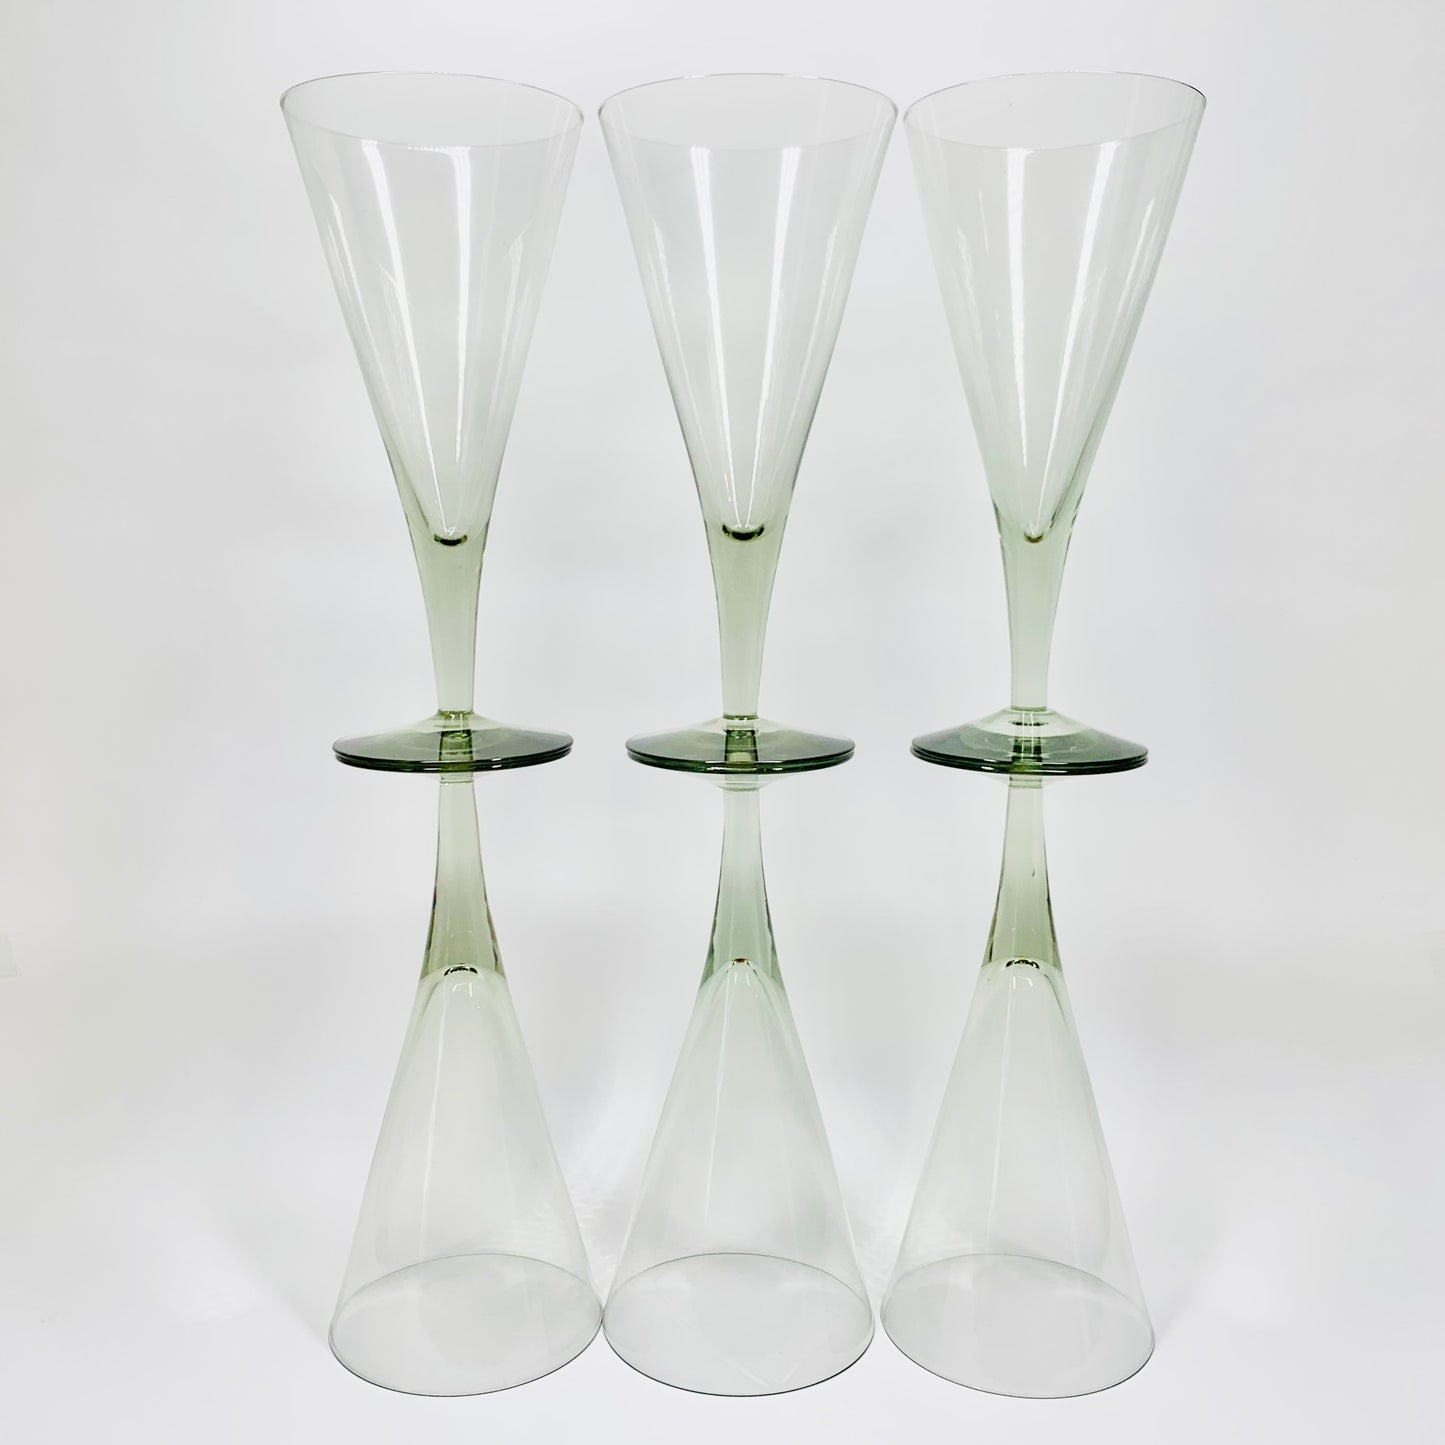 Extremely rare MCM Orrefors large grey schnapps/wine glasses